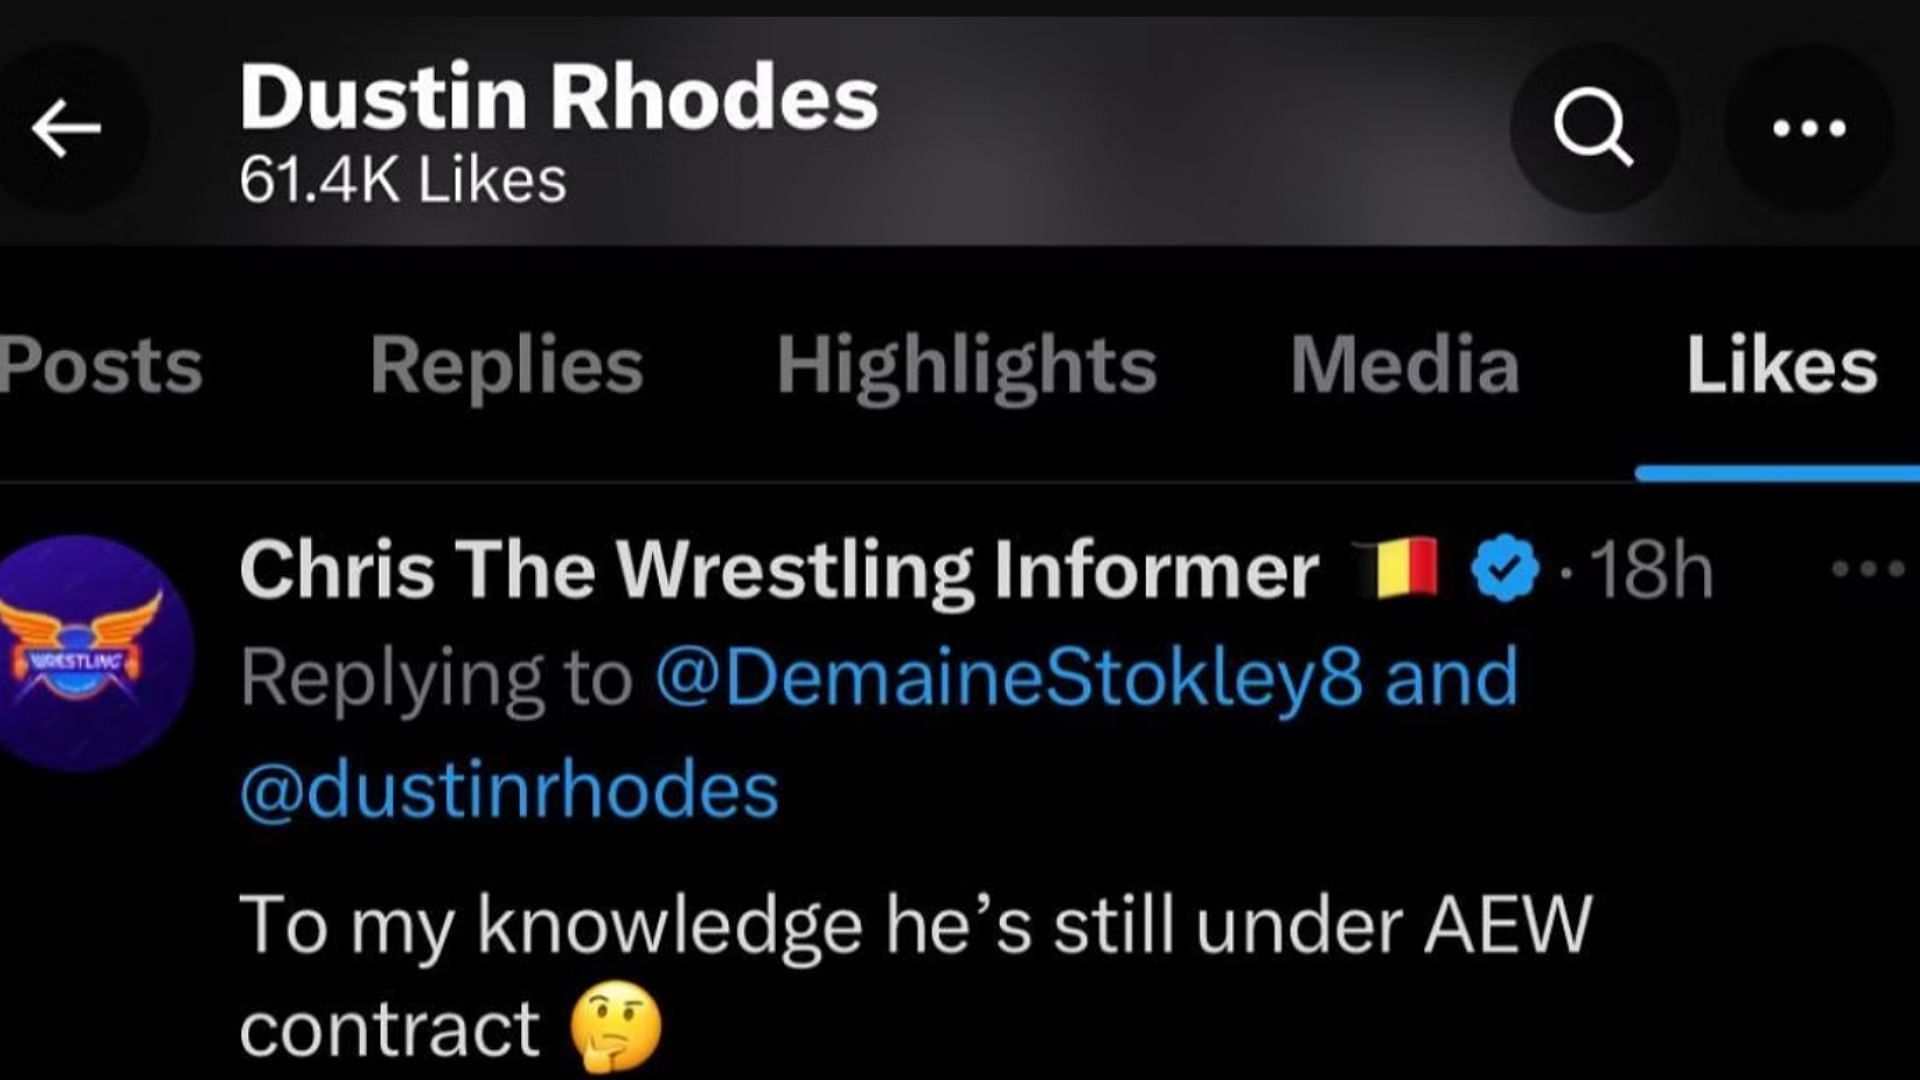 Dustin Rhodes may have confirmed his AEW status on X/Twitter